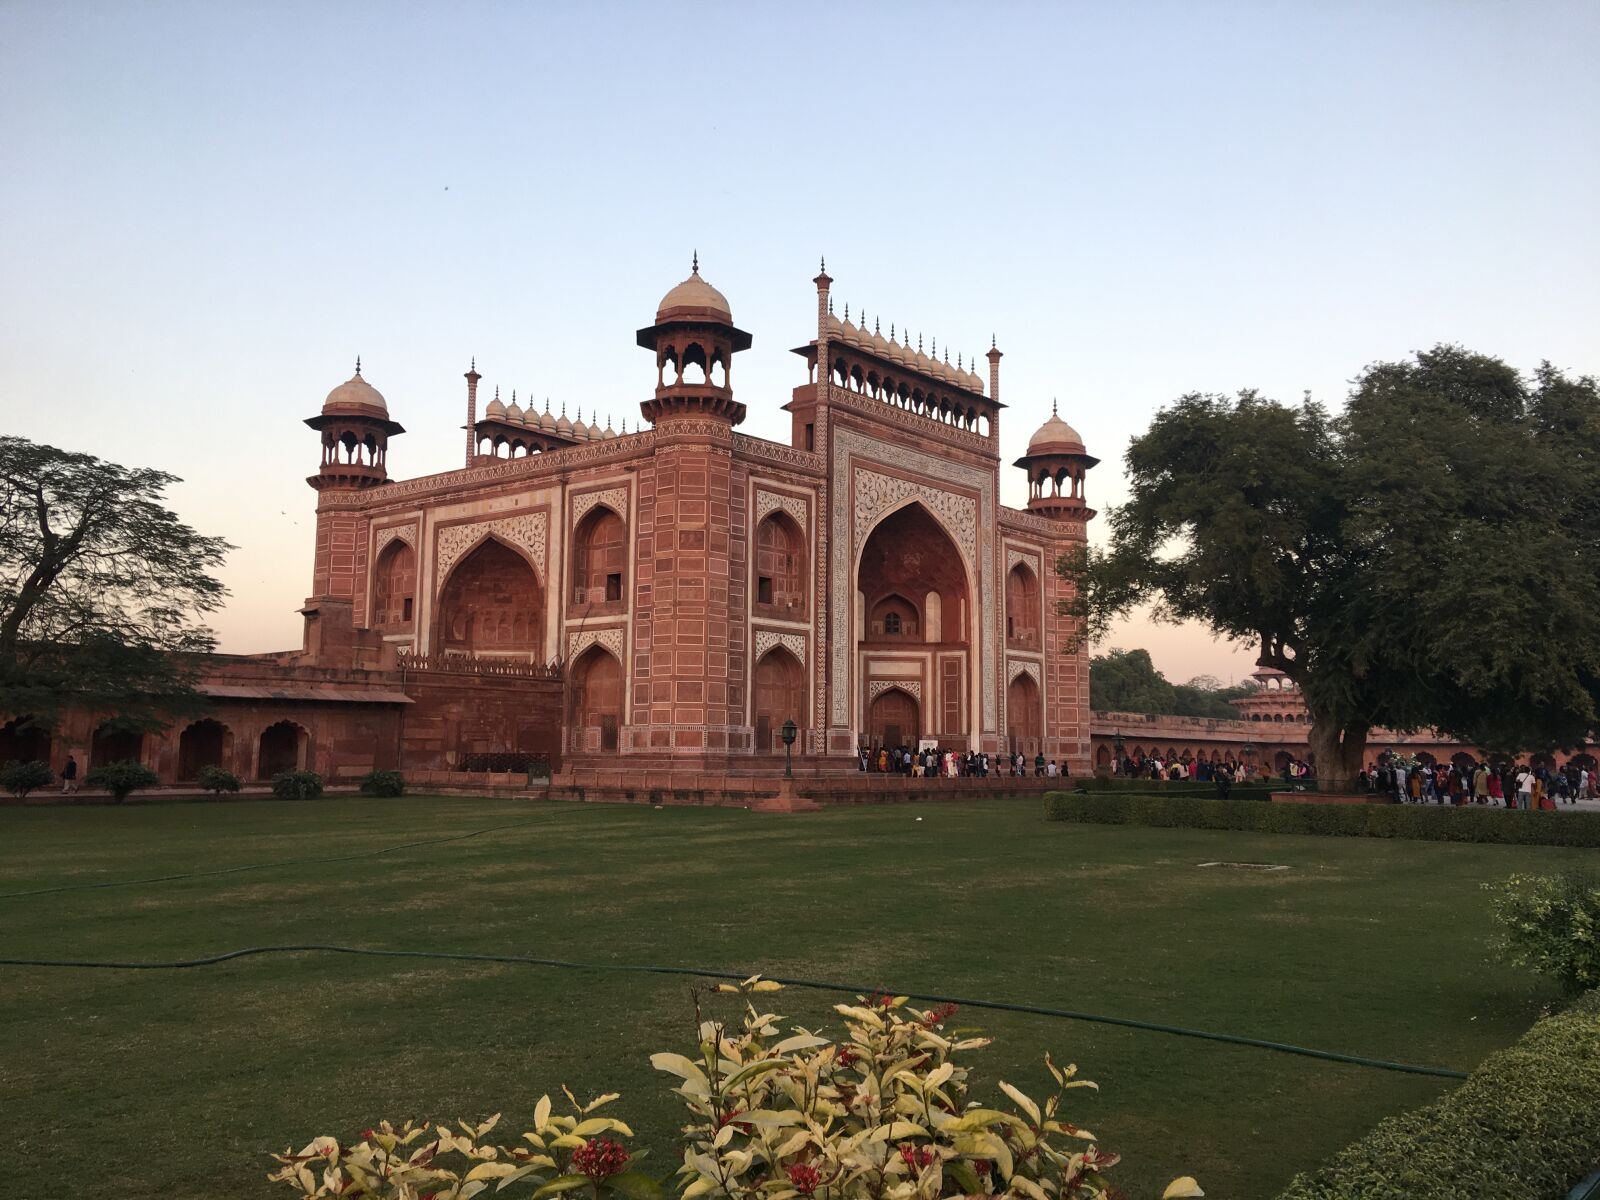 Apple iPhone 6s Plus + iPhone 6s Plus back camera 4.15mm f/2.2 sample photo. Monument, agra, architecture photography